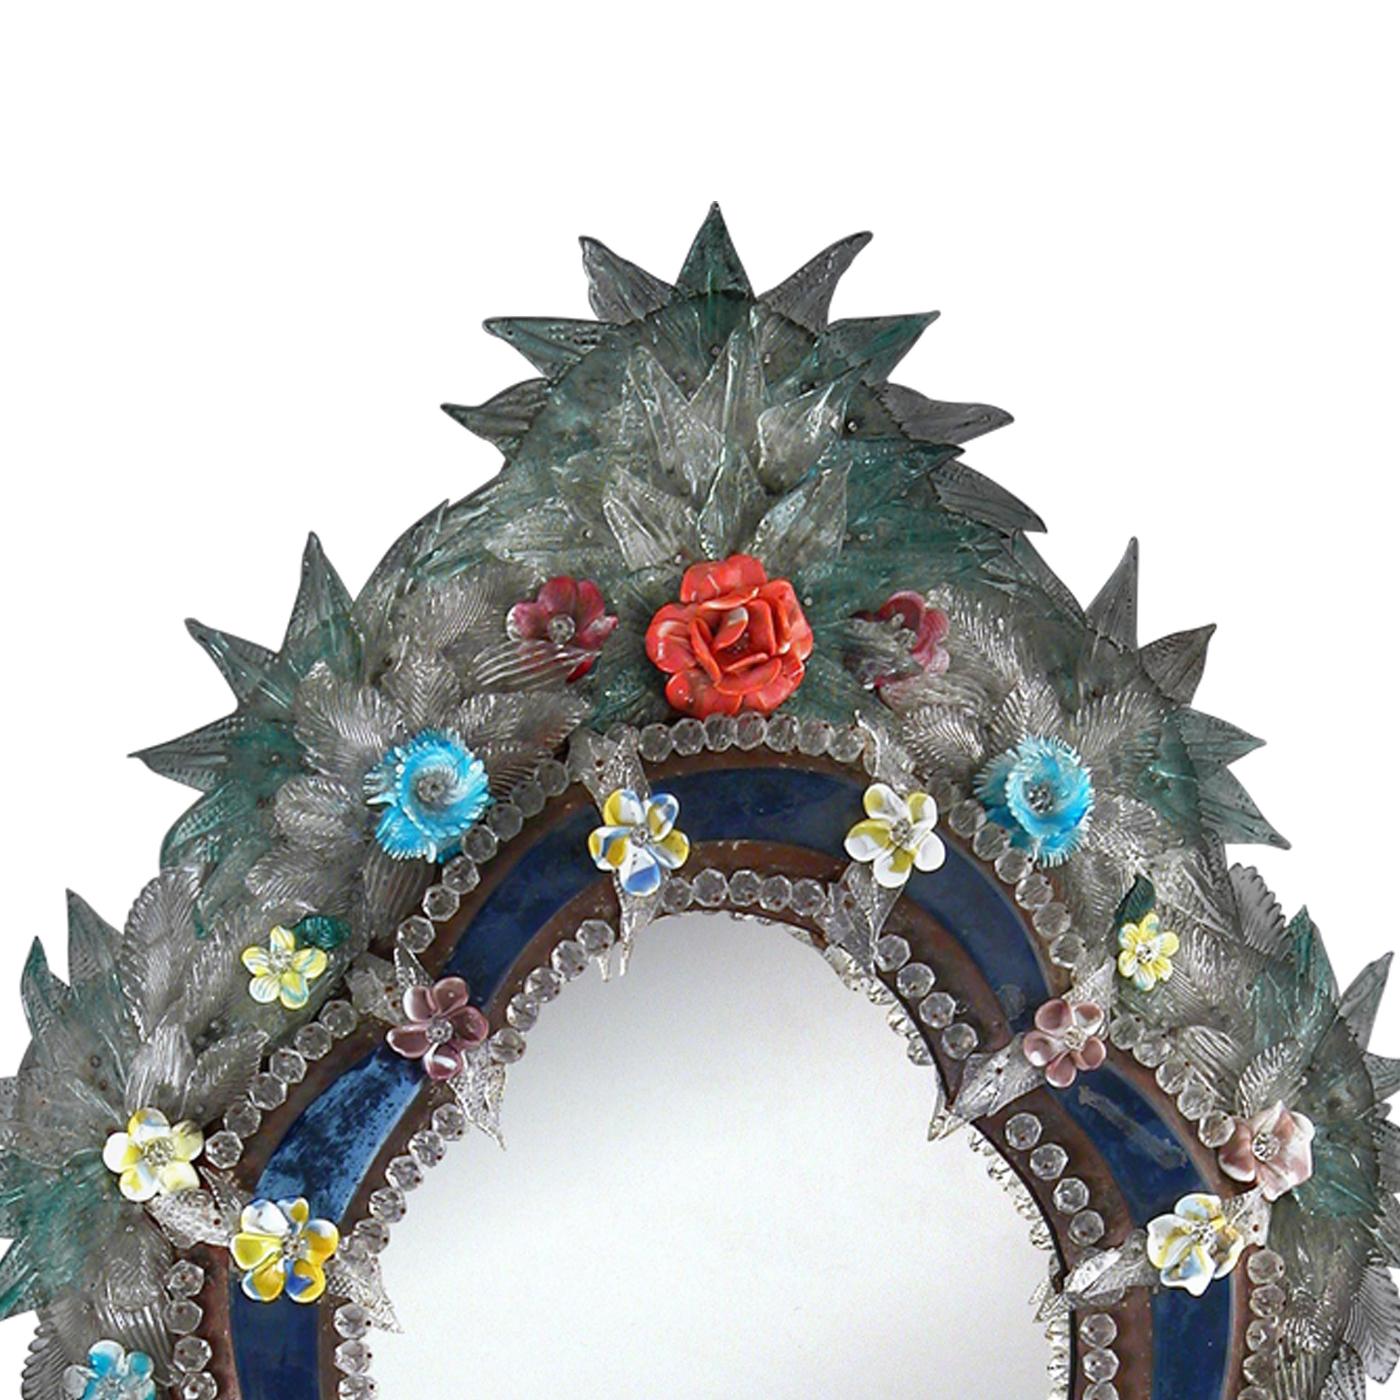 This elegant mirror has an antique finish and an exquisite blue frame in Murano glass adorned at the top and bottom by hand-made vivid green leaves and multicolored flowers.